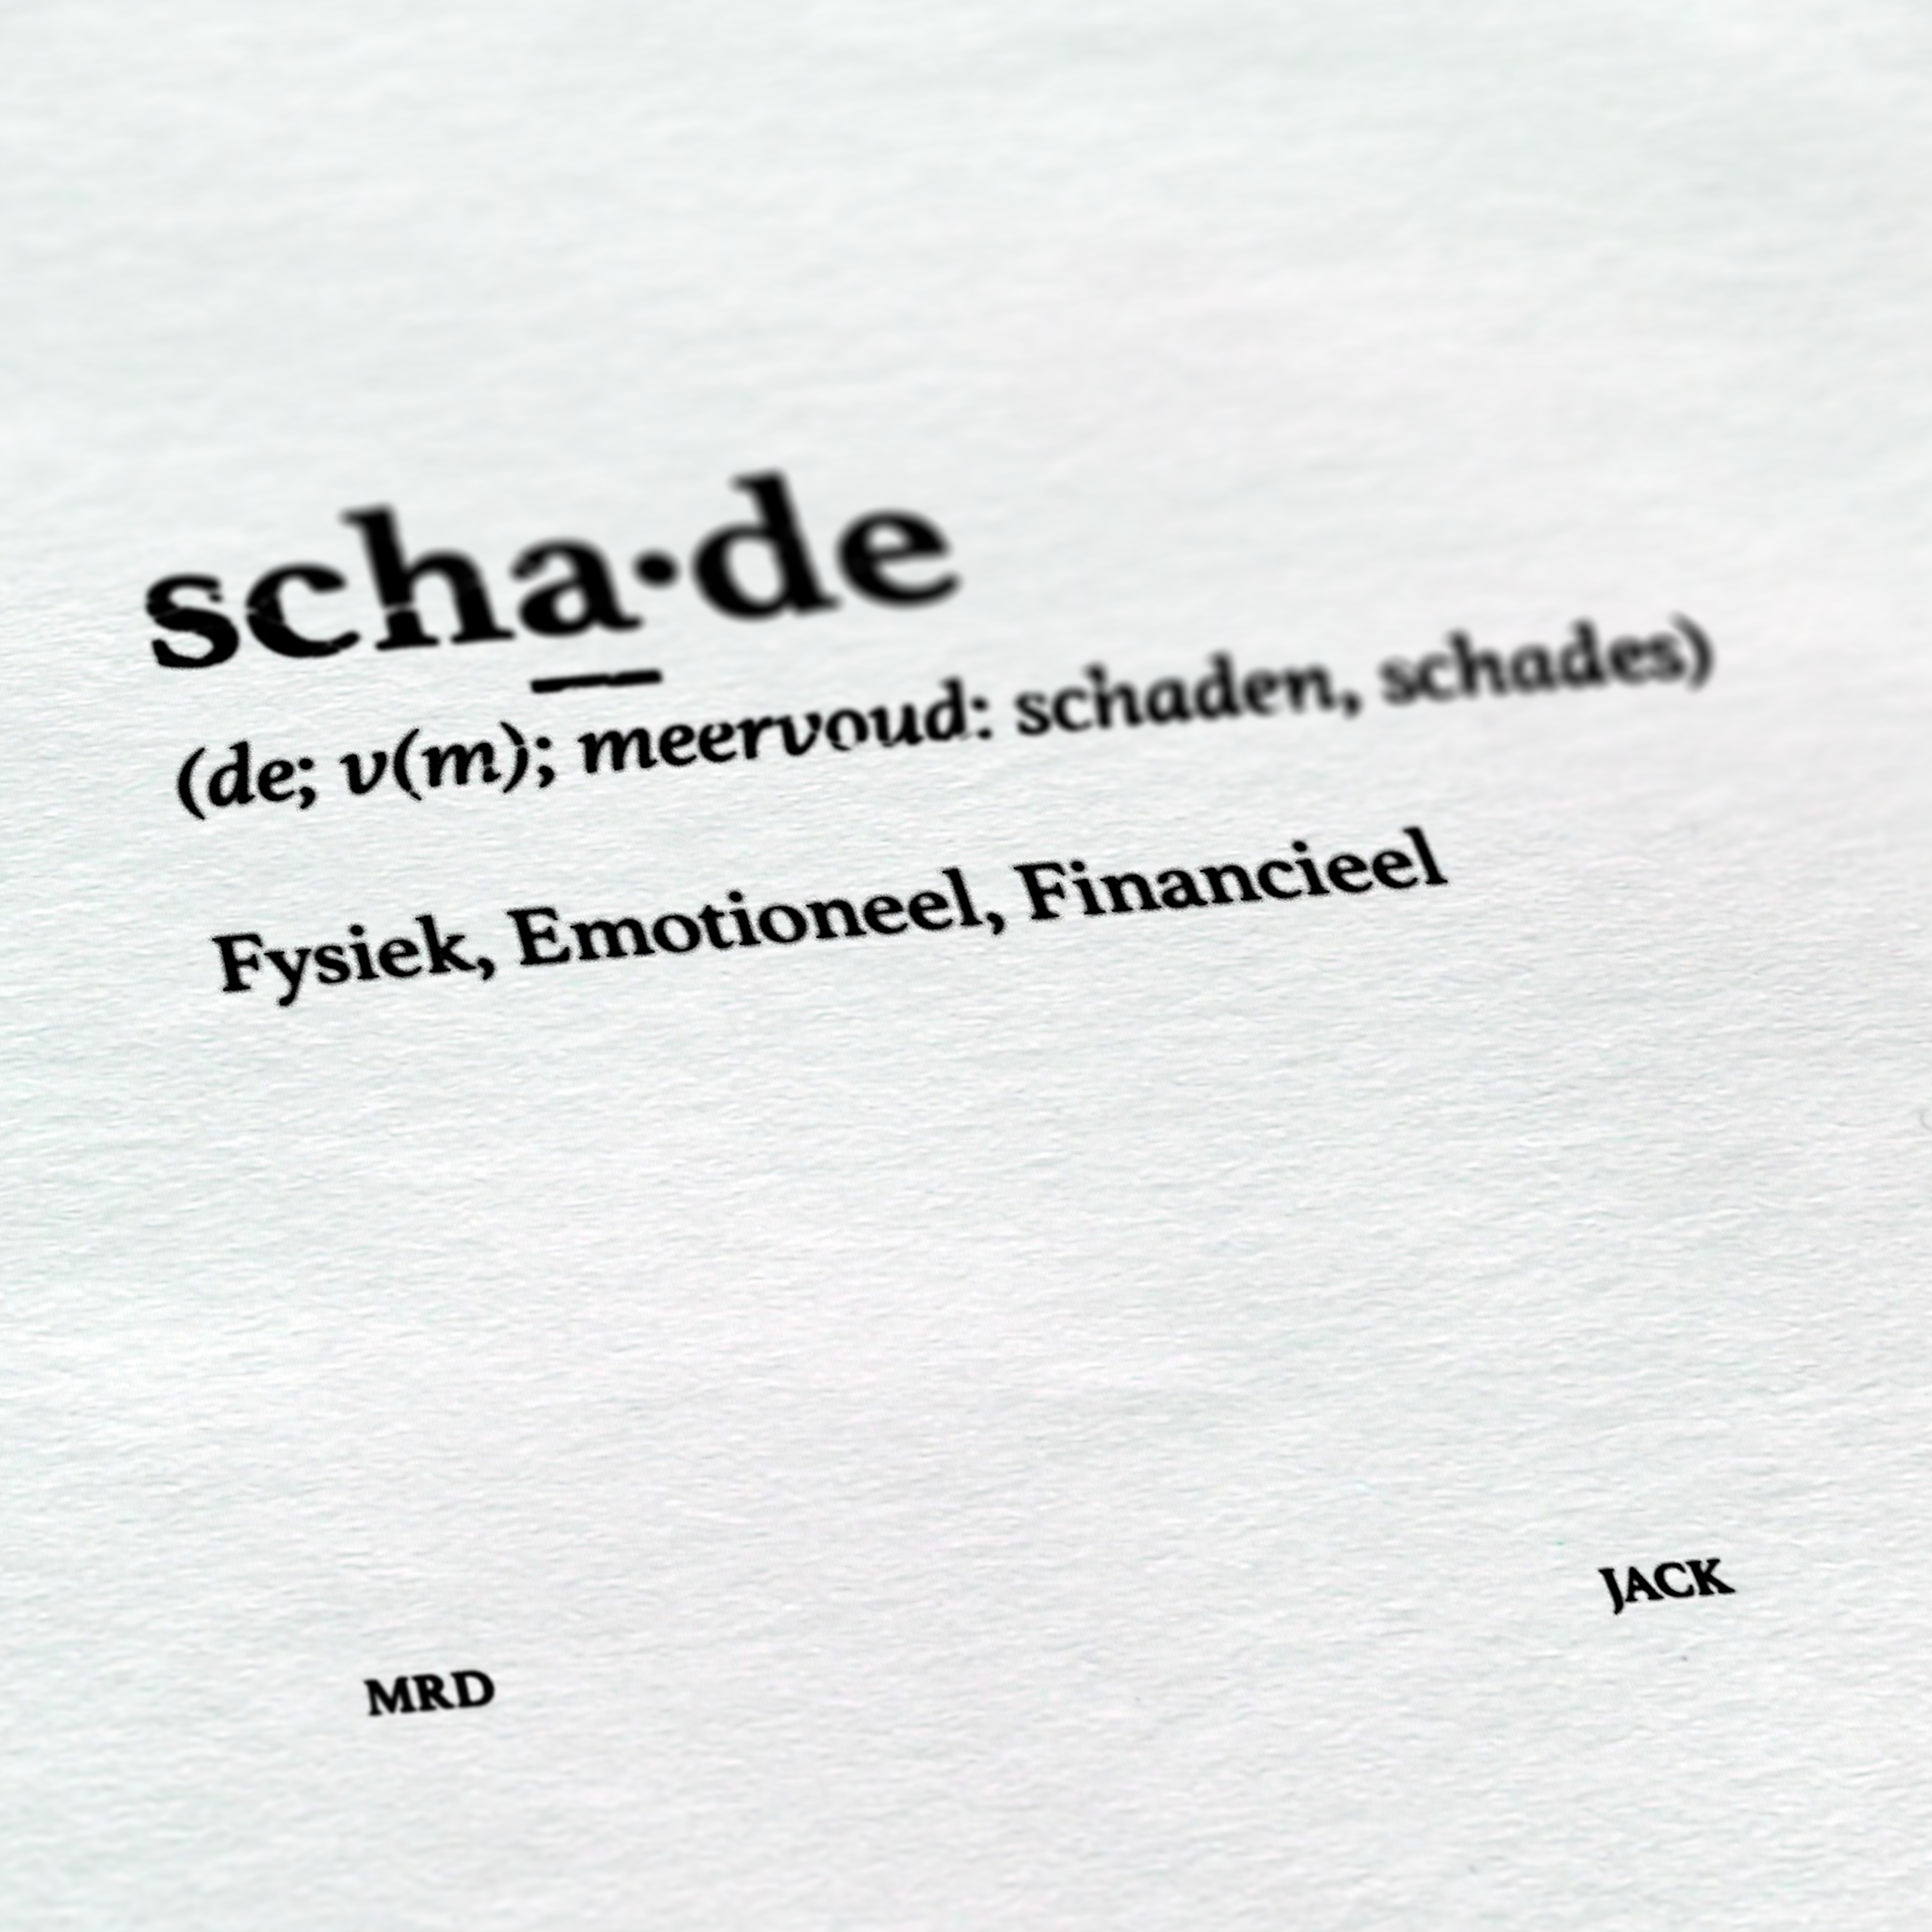 [OUT NOW] MRD & JACK – “Schade”